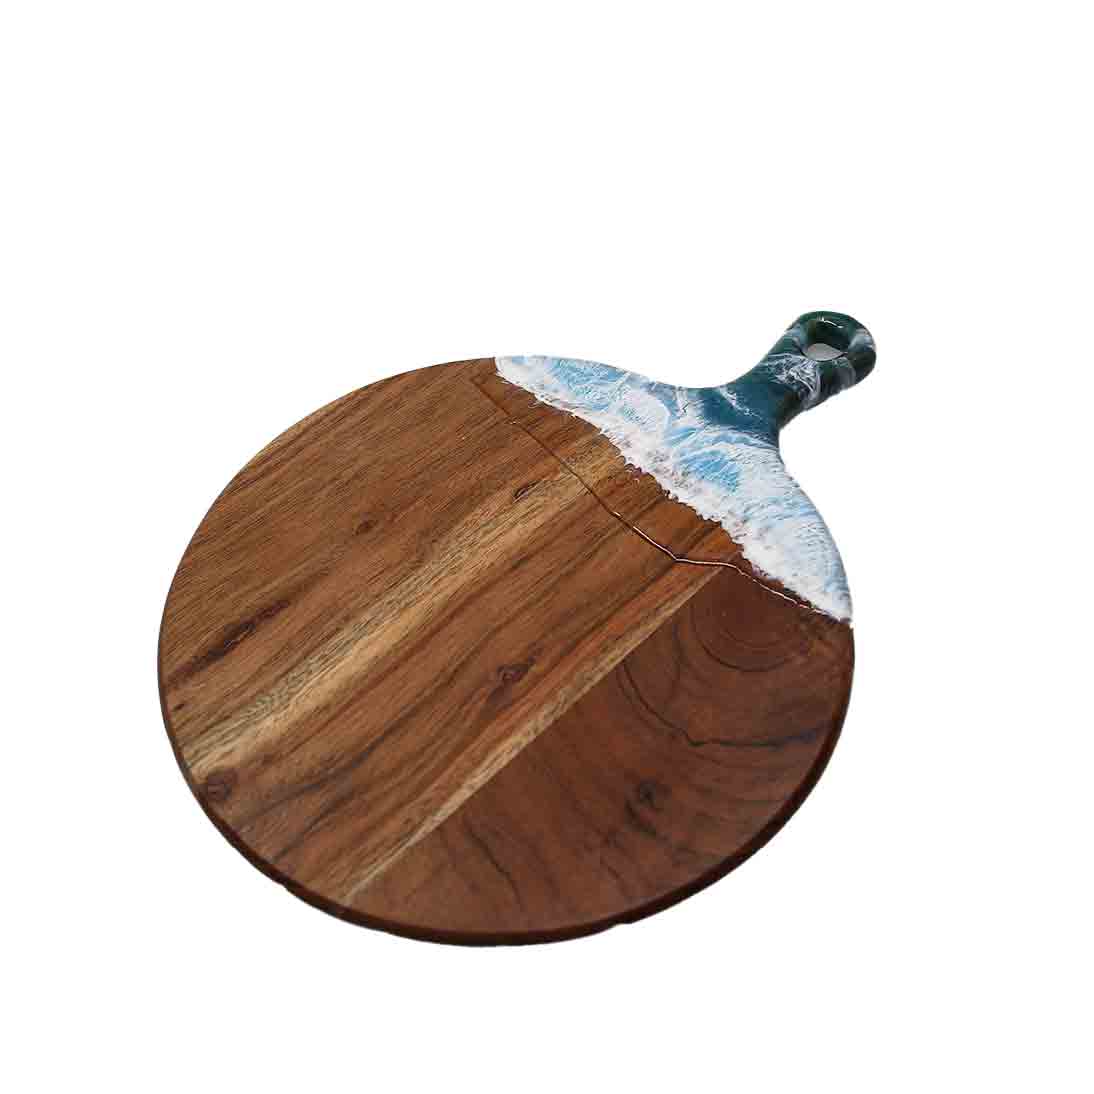 Round paddle board, cheese board, bread board with ocean theme resin painting on handle.  